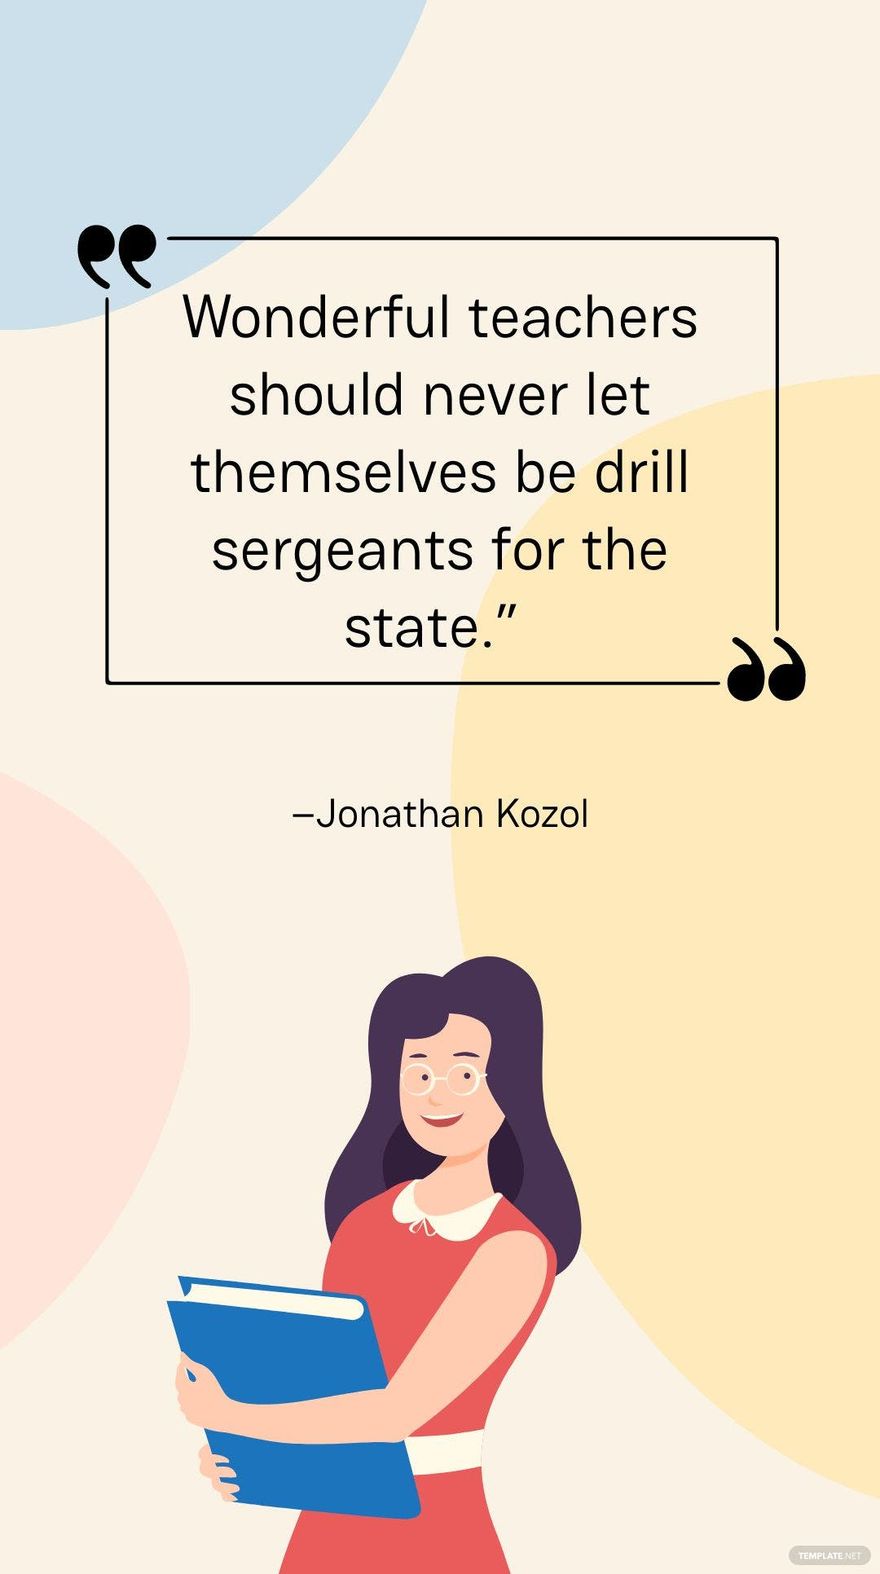 Jonathan Kozol - Wonderful teachers should never let themselves be drill sergeants for the state.